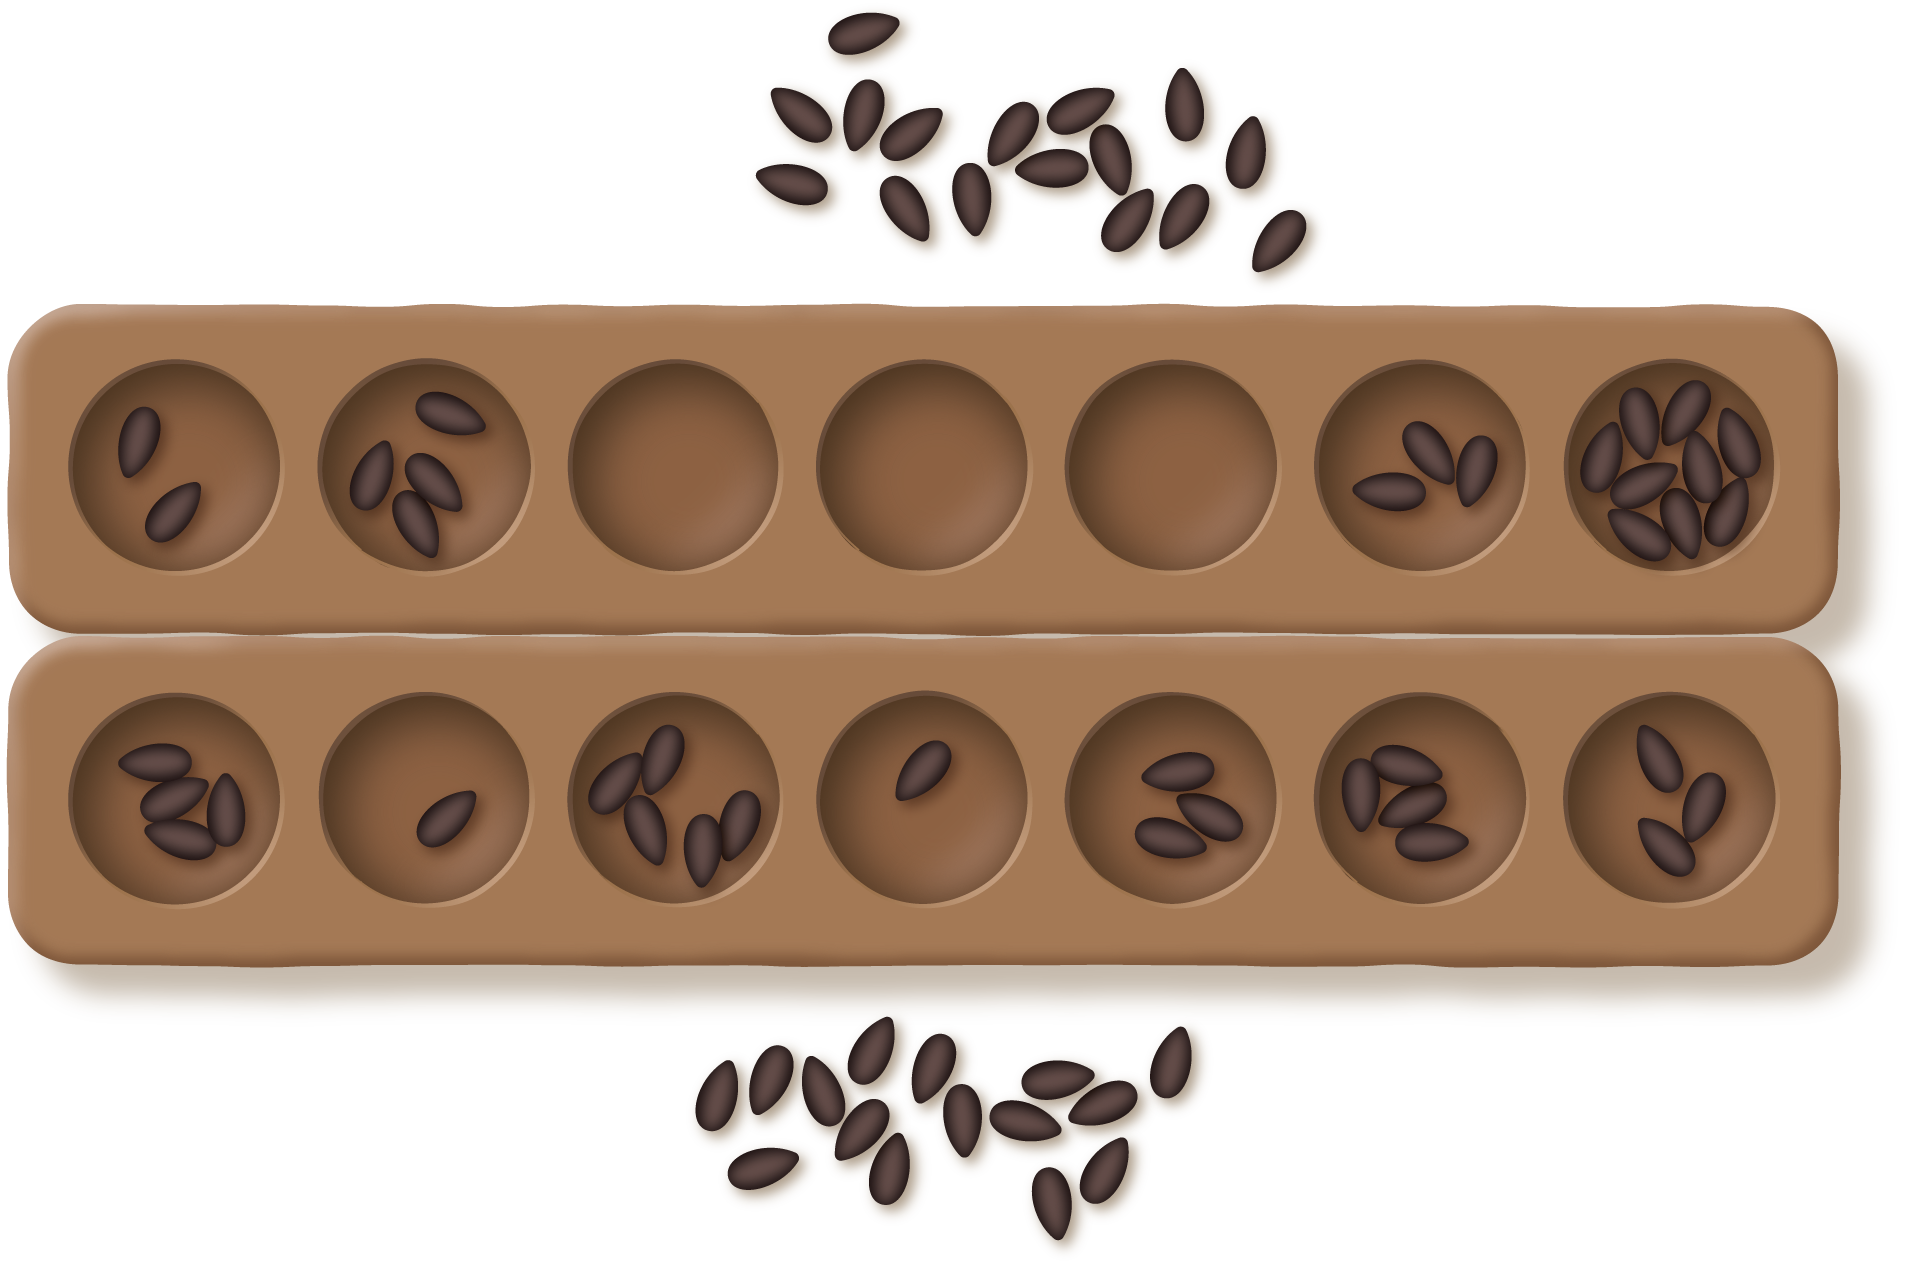 Mancala game board. Some holes have seeds. Some holes are empty. Seeds outside of the game board.